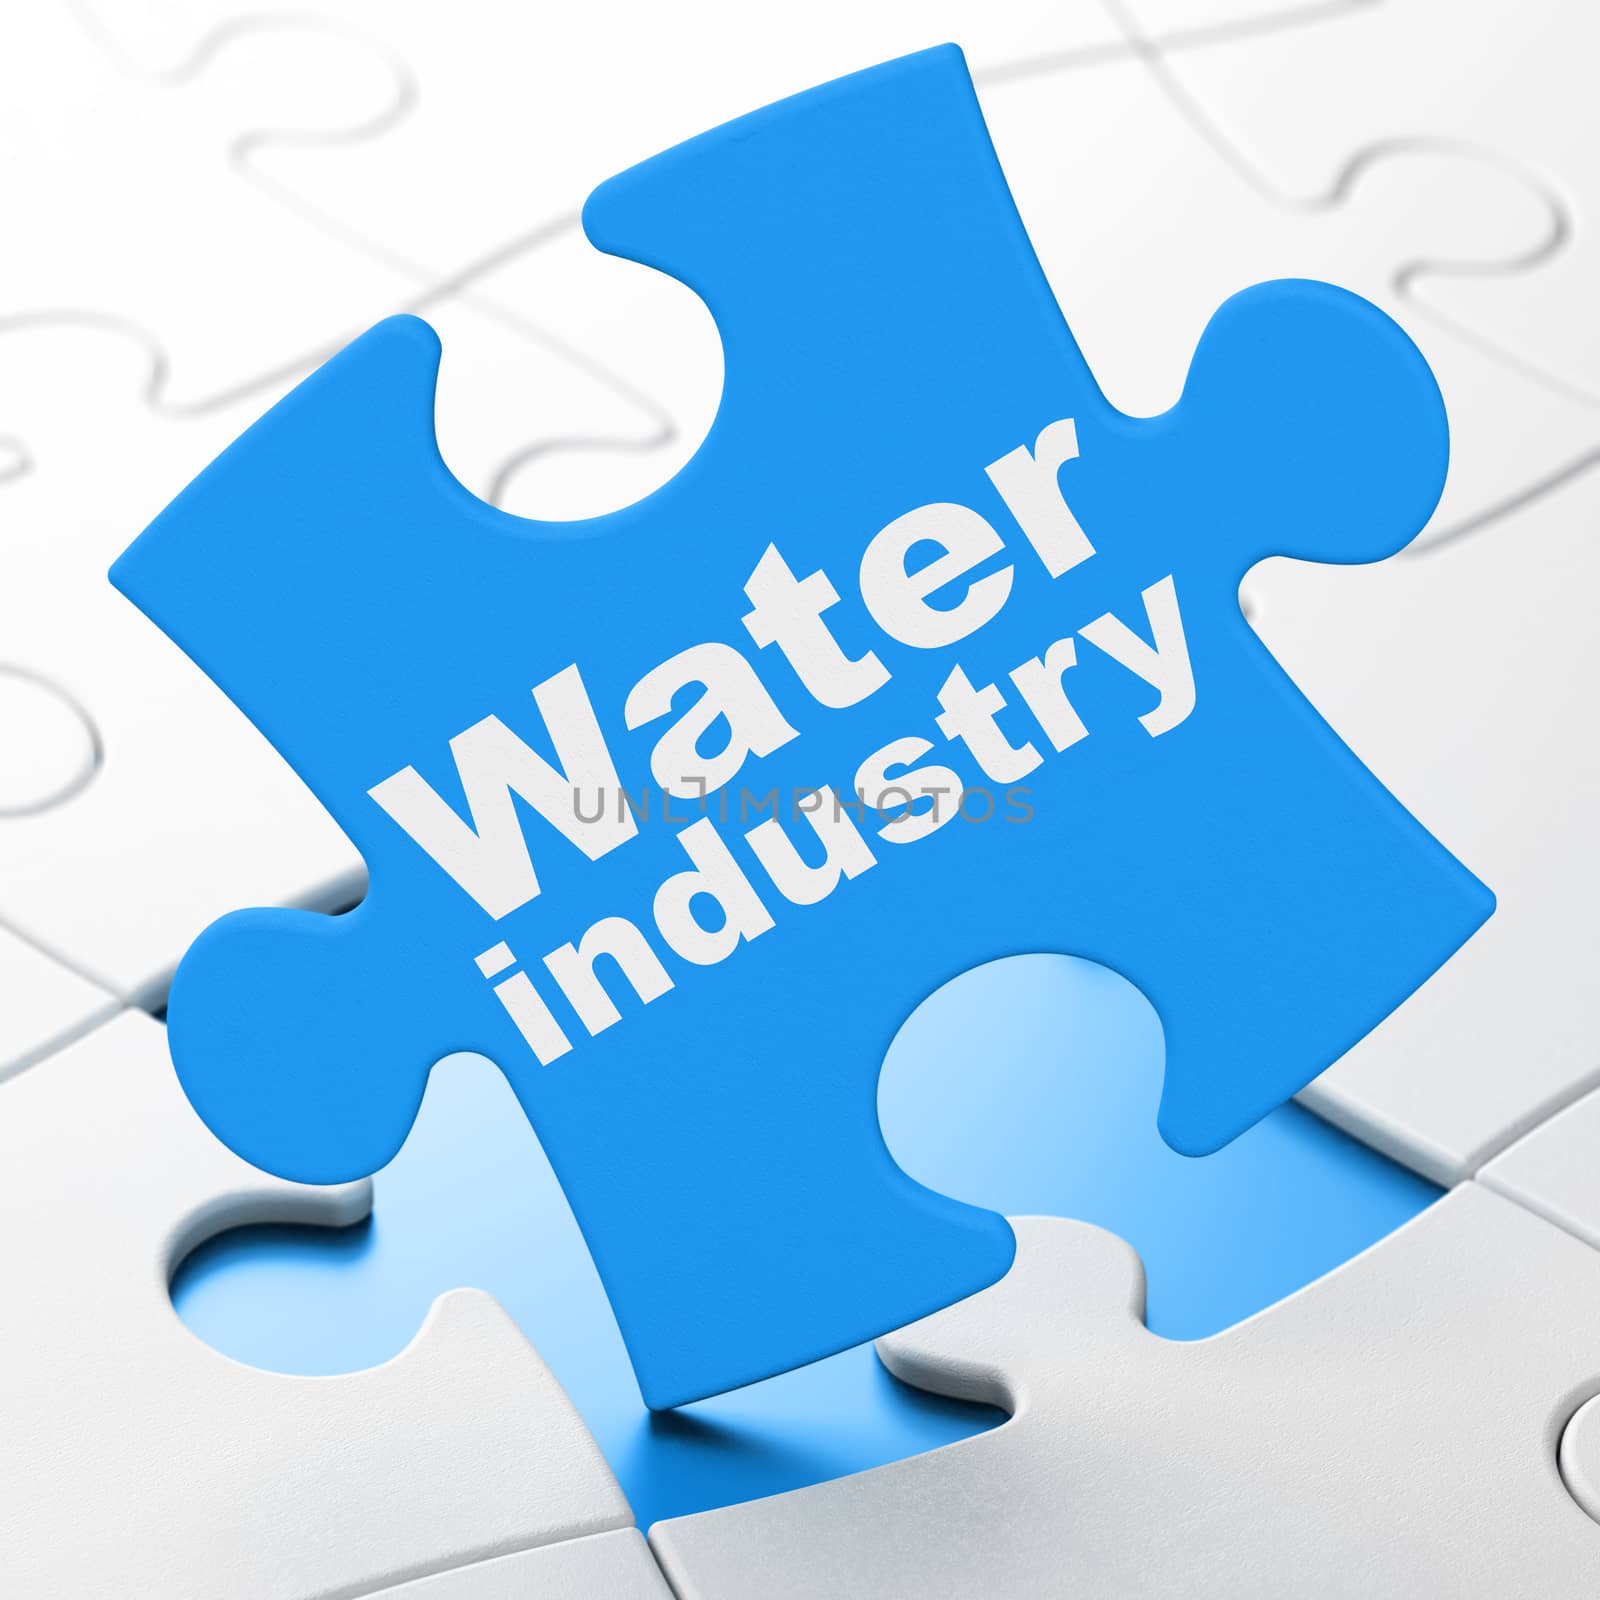 Industry concept: Water Industry on Blue puzzle pieces background, 3D rendering